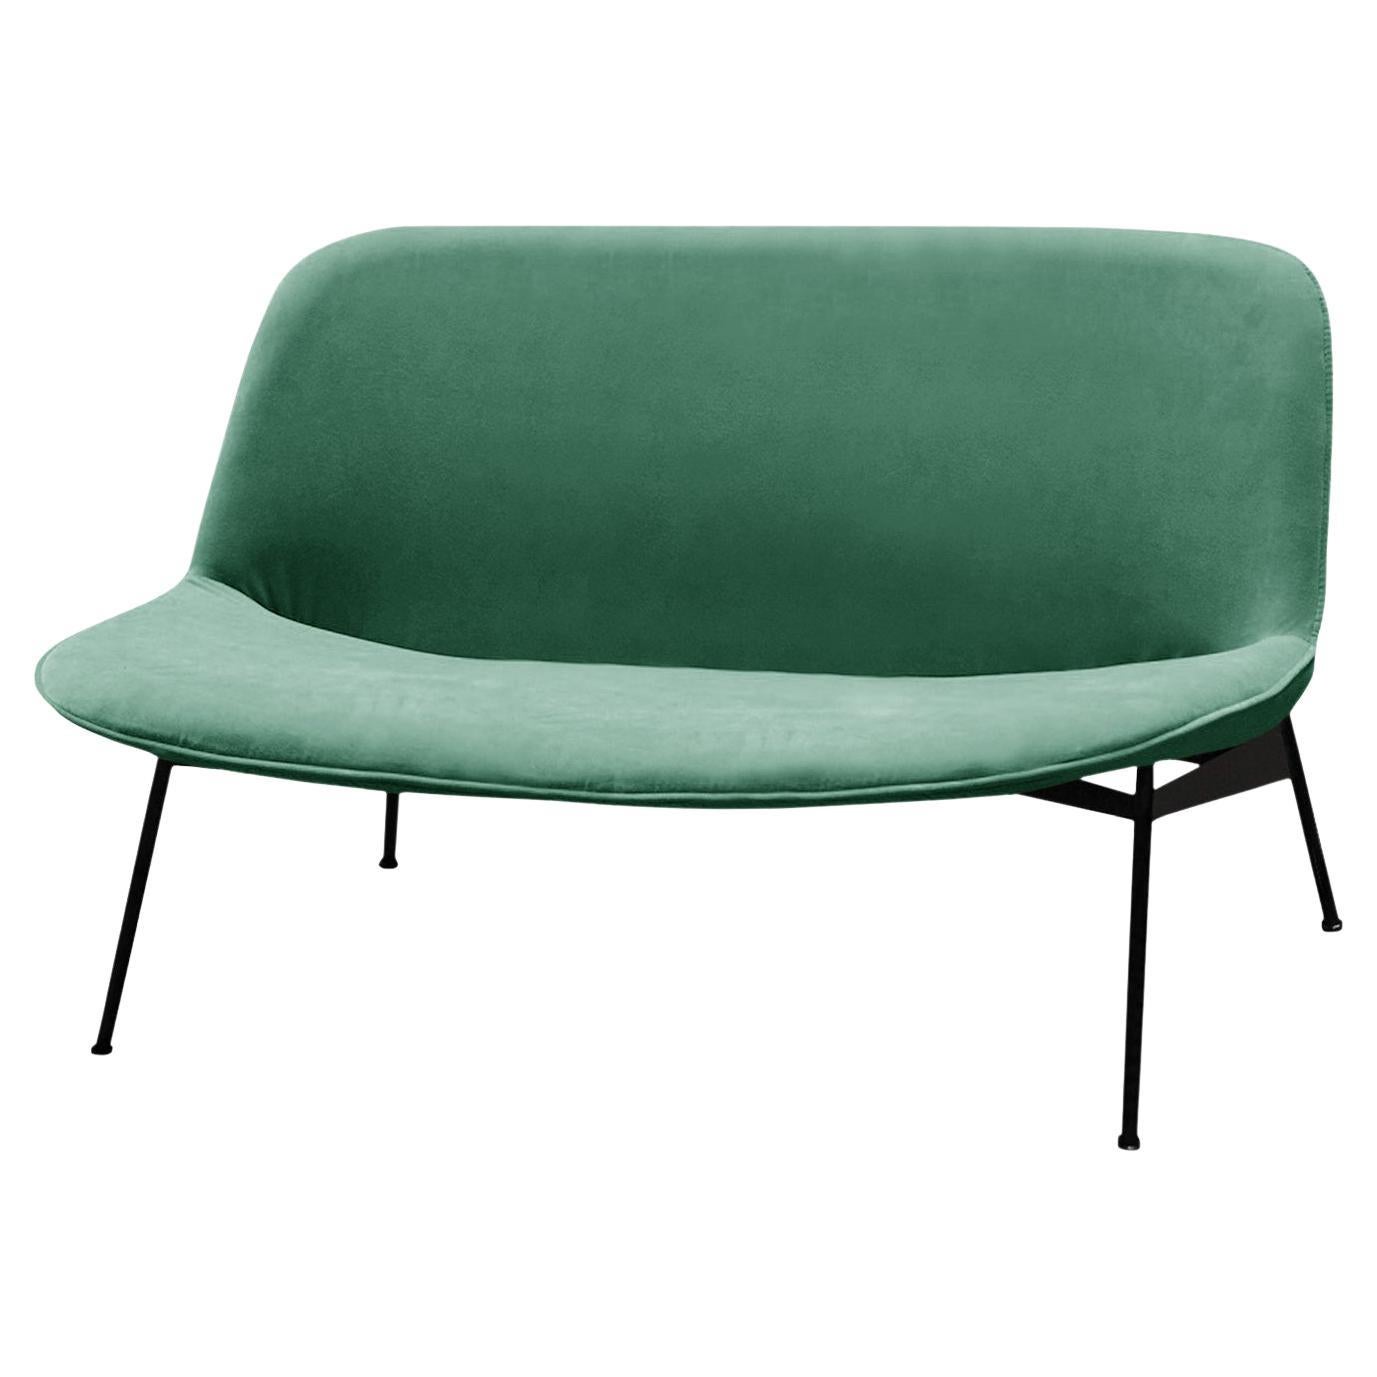 Chiado Sofa, Large with Paris Green and Black For Sale